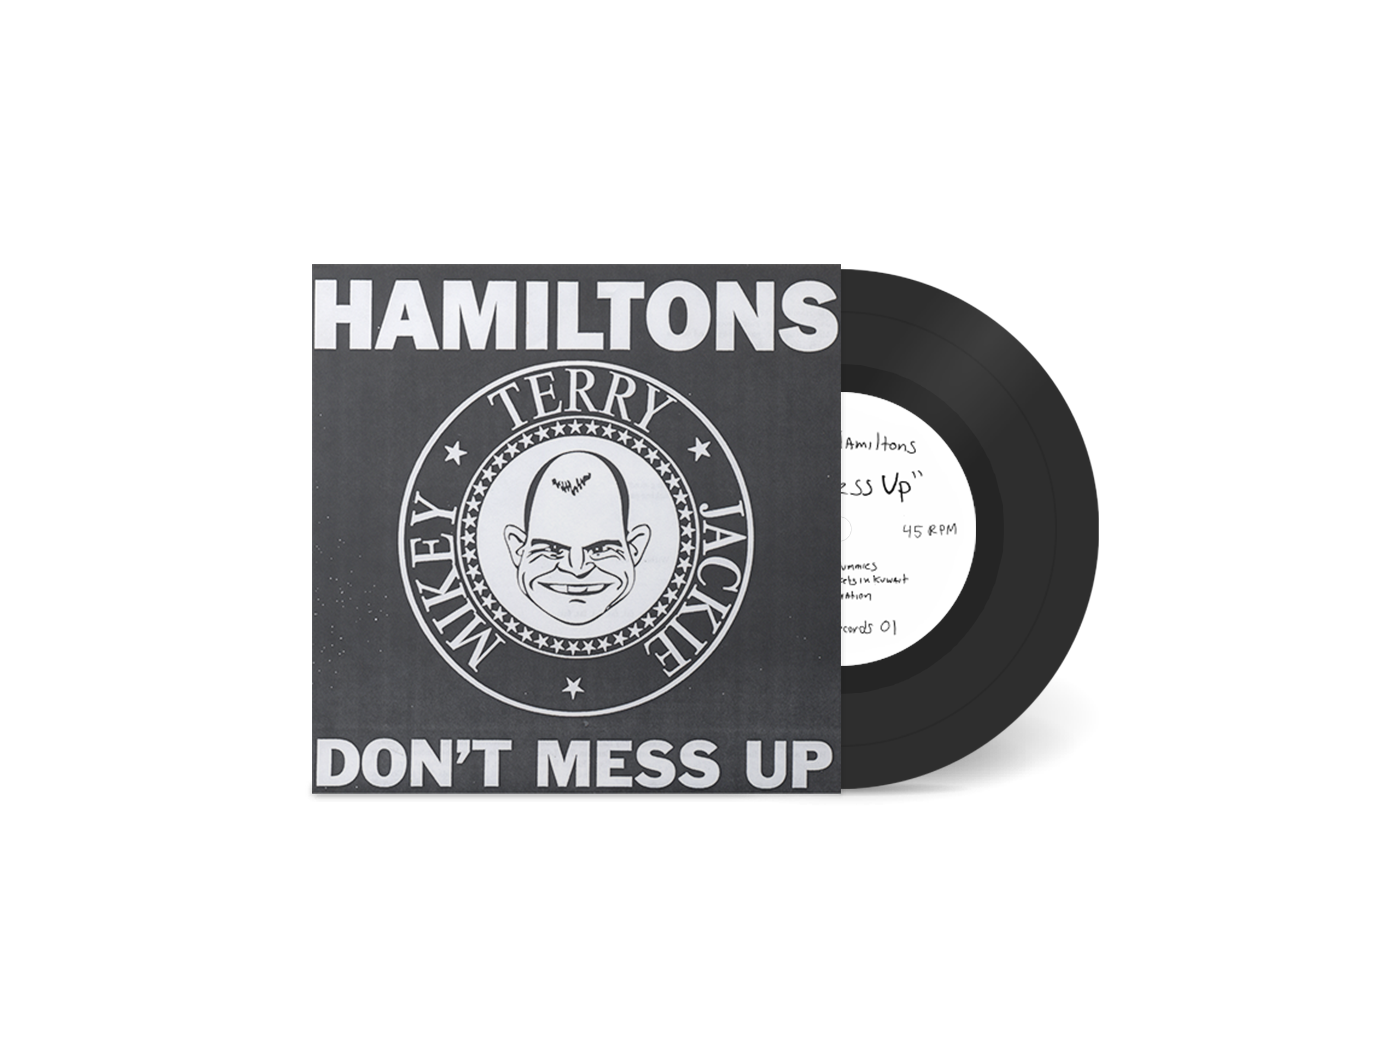 The Hamiltons "Don't Mess Up" 7"